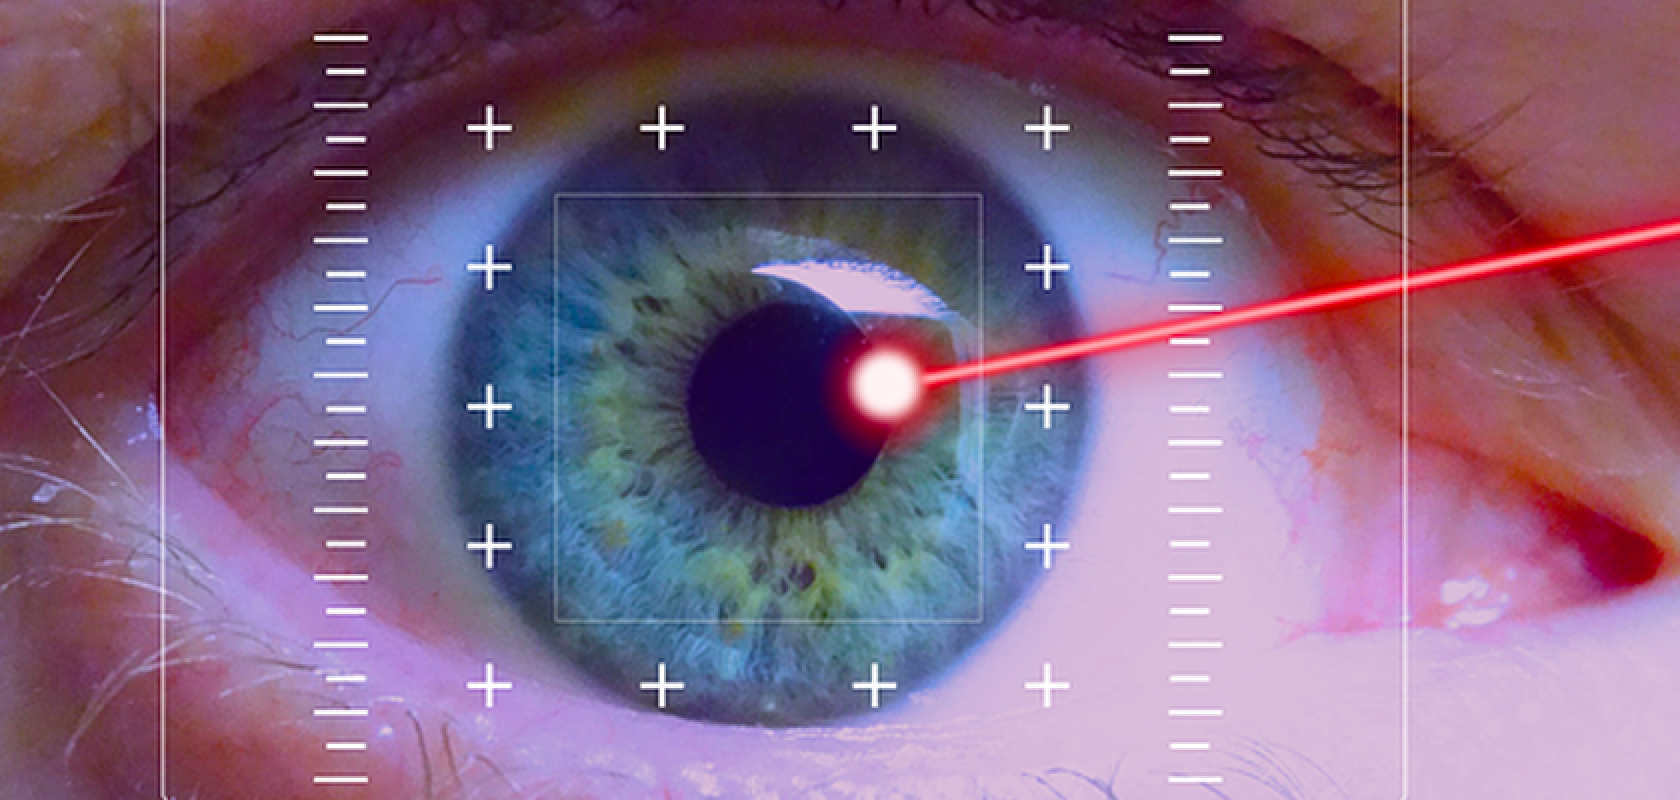 Synchronisation between the scanners and the BitFlow frame grabber supported the cornea imaging technique (Image: The Healthcare Technology Report)